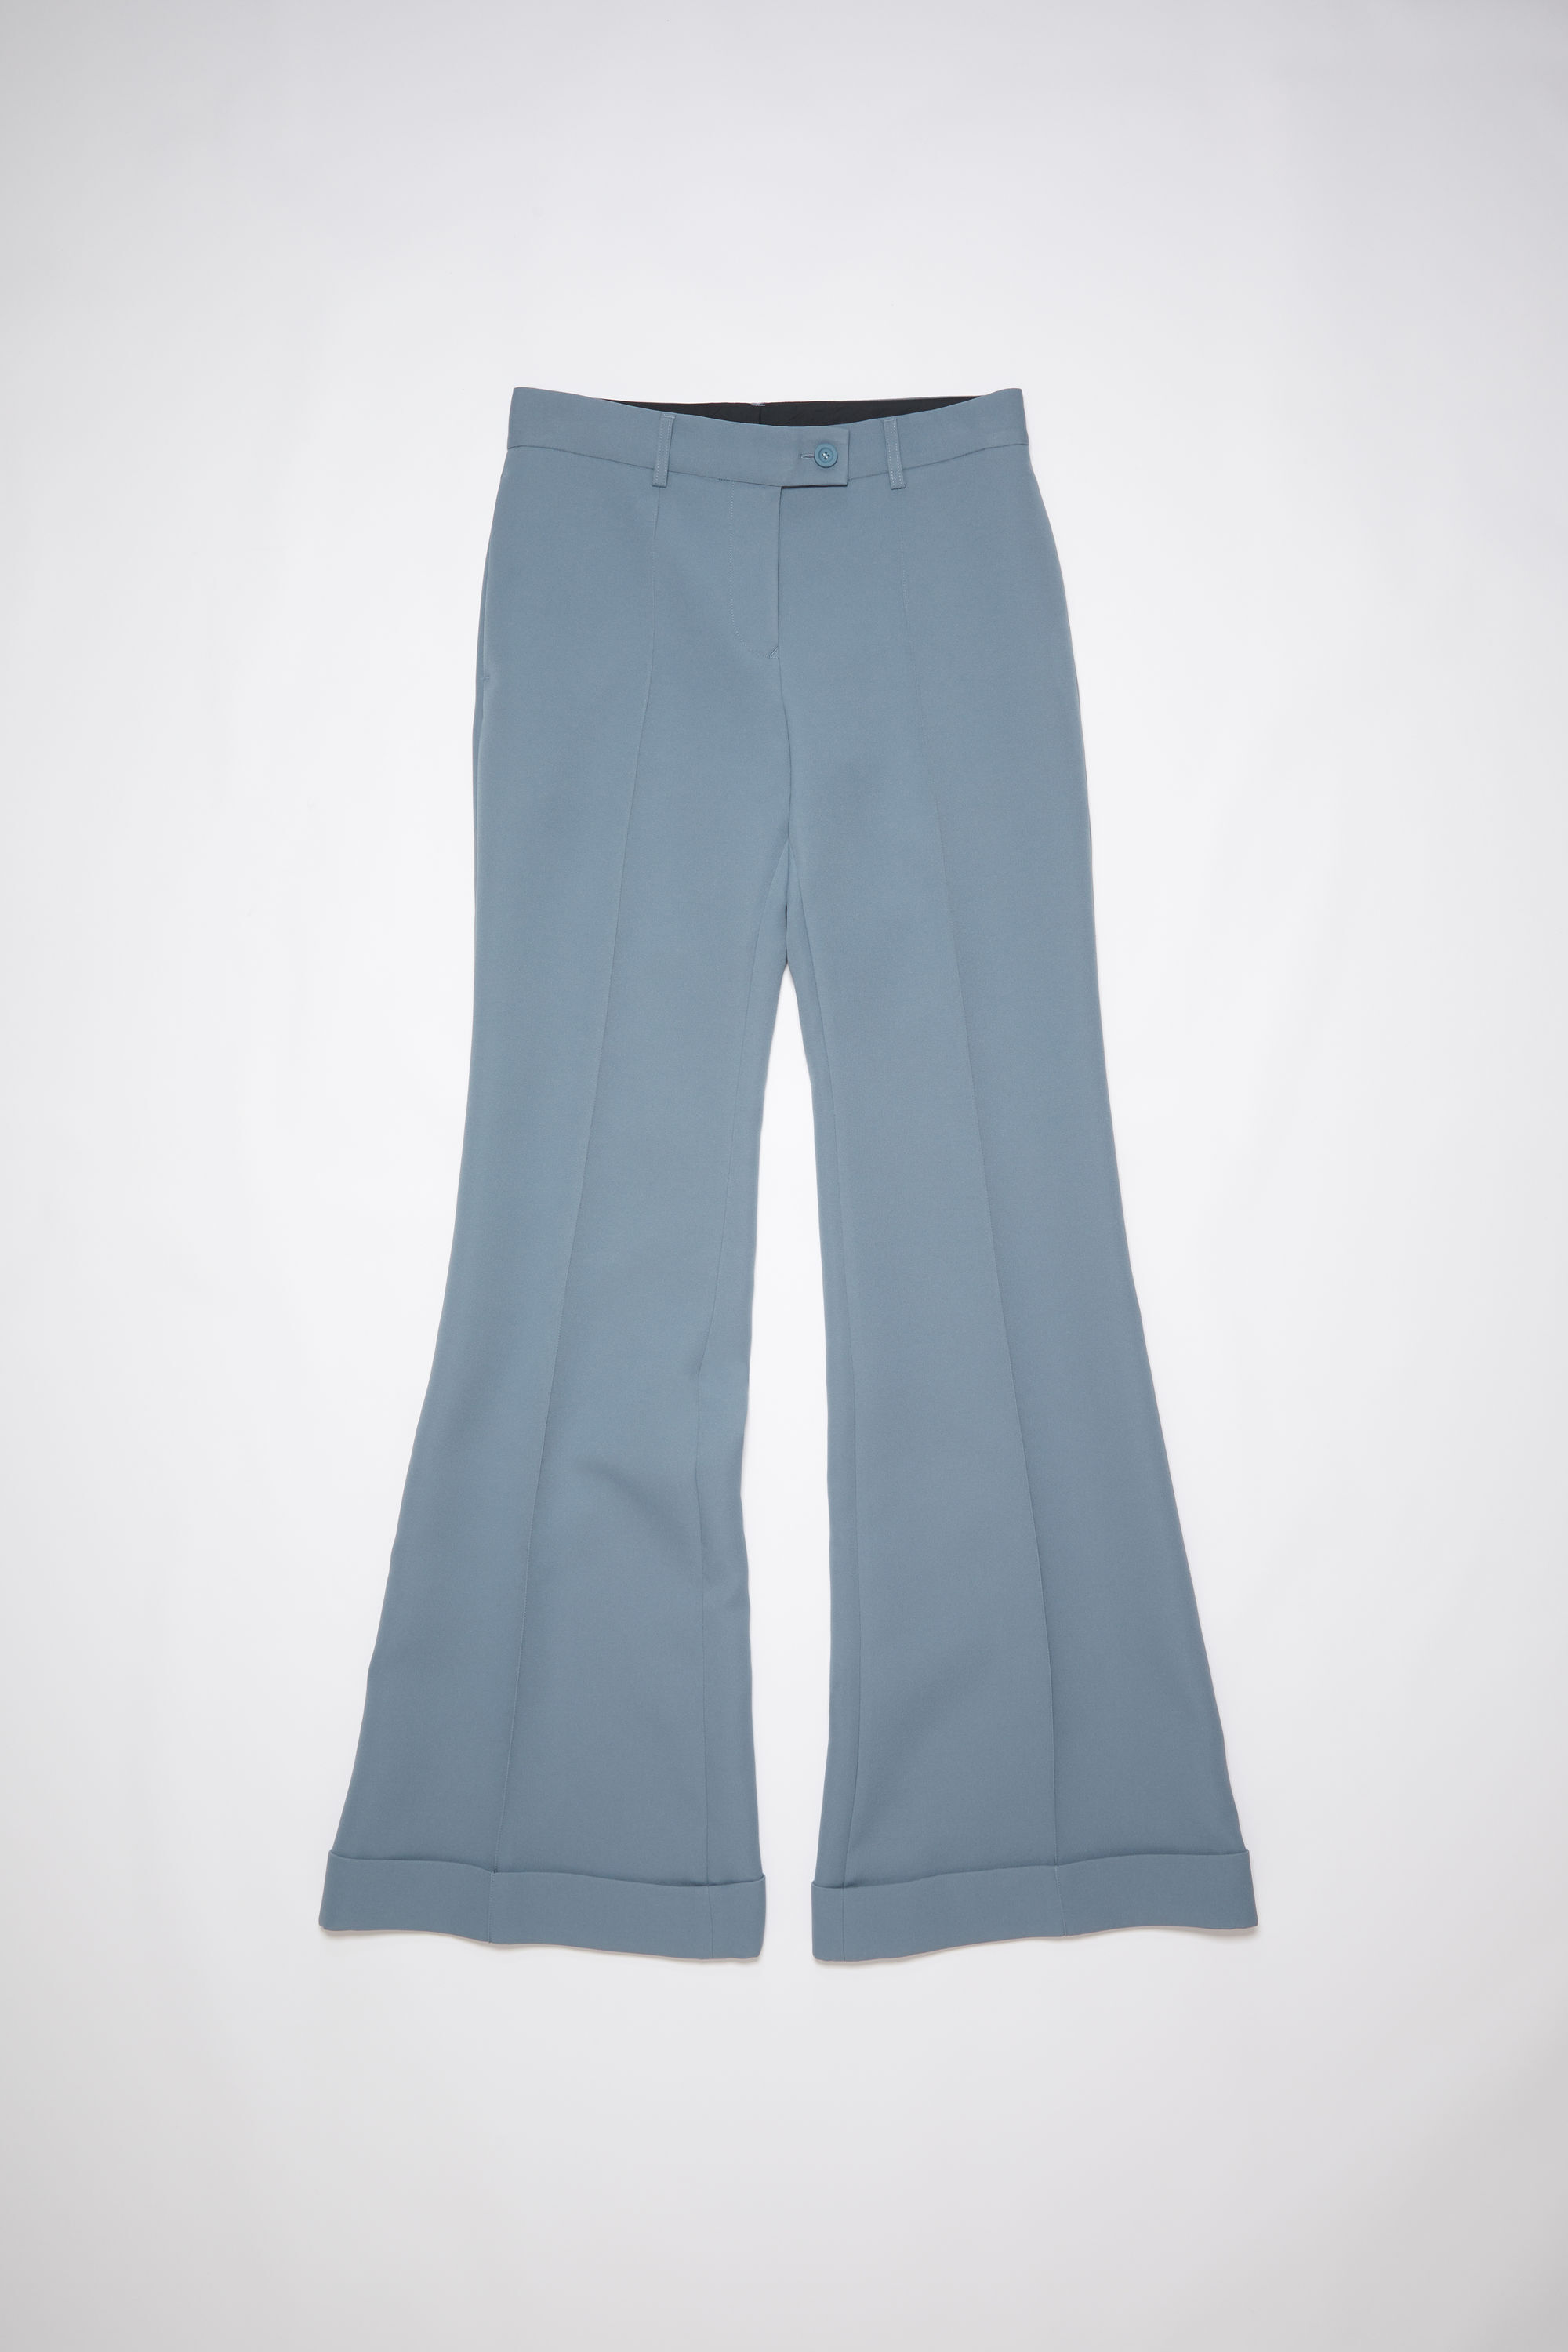 Acne Studios - Tailored trousers - Dusty blue